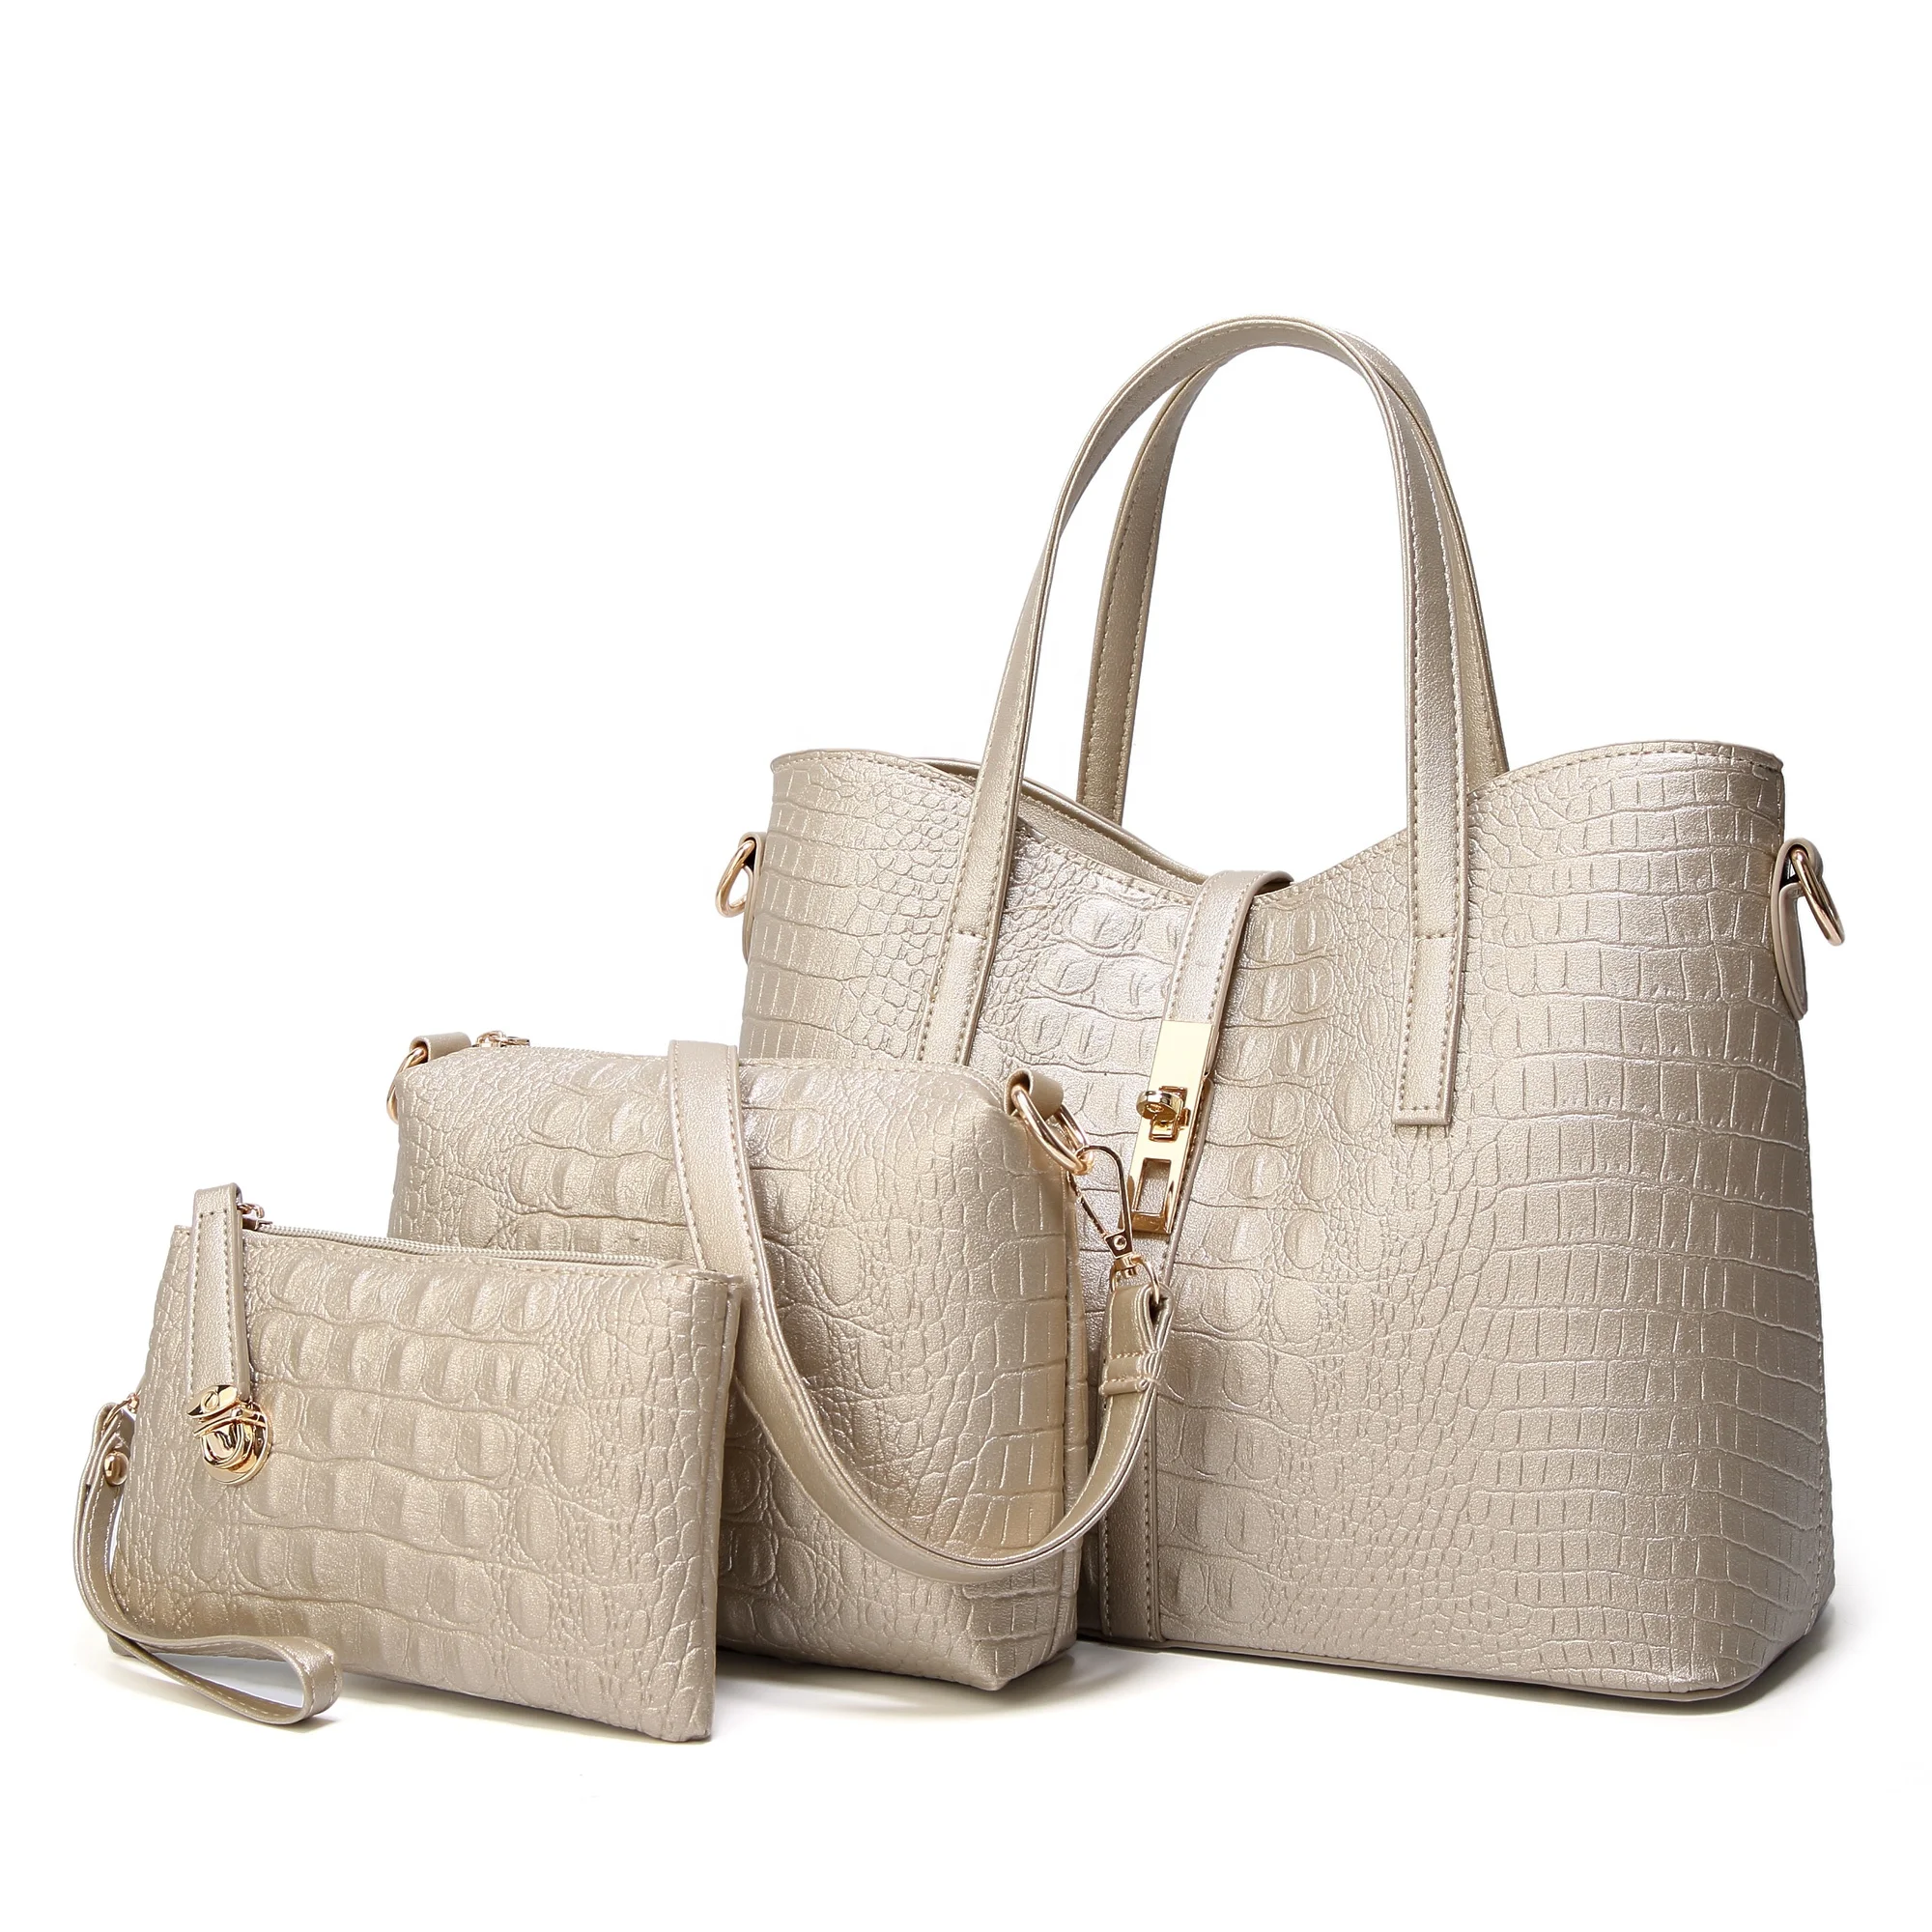 

China Bag Manufacturer, Crocodile tote handbags from Chinese manufacturer FS6257, See below pictures showed